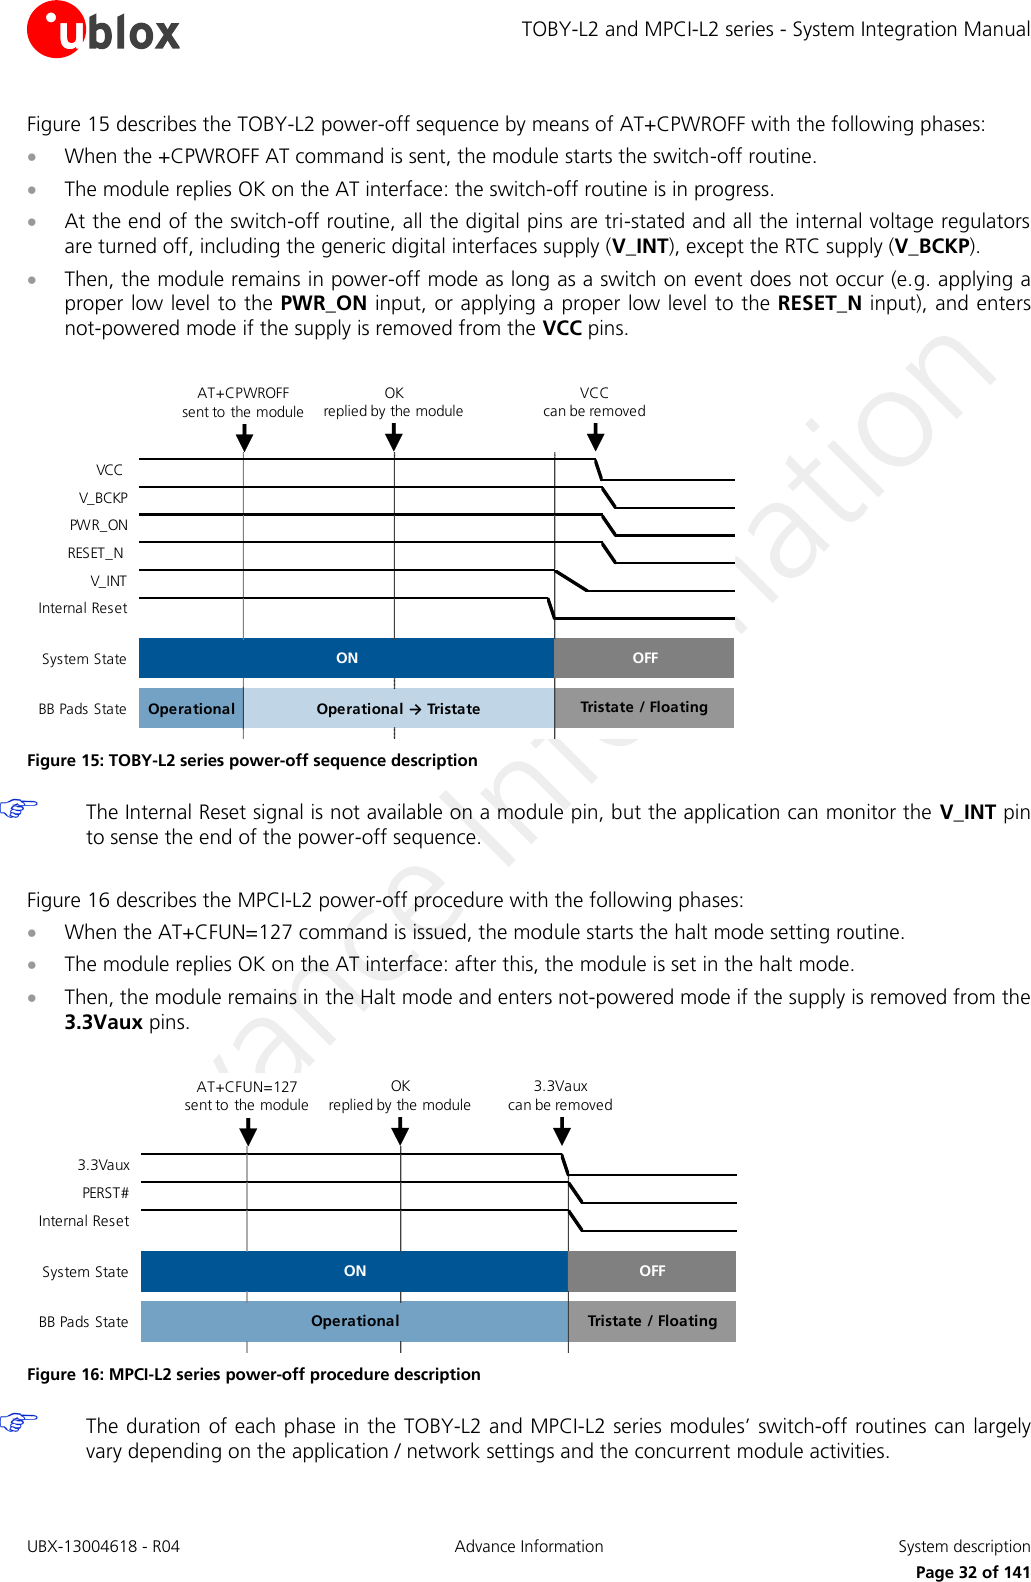 TOBY-L2 and MPCI-L2 series - System Integration Manual UBX-13004618 - R04  Advance Information  System description     Page 32 of 141 Figure 15 describes the TOBY-L2 power-off sequence by means of AT+CPWROFF with the following phases:  When the +CPWROFF AT command is sent, the module starts the switch-off routine.  The module replies OK on the AT interface: the switch-off routine is in progress.   At the end of the switch-off routine, all the digital pins are tri-stated and all the internal voltage regulators are turned off, including the generic digital interfaces supply (V_INT), except the RTC supply (V_BCKP).  Then, the module remains in power-off mode as long as a switch on event does not occur (e.g. applying a proper low level to the PWR_ON input, or applying a proper low level to the RESET_N input), and enters not-powered mode if the supply is removed from the VCC pins.  VCC V_BCKPPWR_ONRESET_N V_INTInternal ResetSystem StateBB Pads State OperationalOFFTristate / FloatingONOperational → TristateAT+CPWROFFsent to the module0 s~2.5 s~5 sOKreplied by the moduleVCC                can be removed Figure 15: TOBY-L2 series power-off sequence description  The Internal Reset signal is not available on a module pin, but the application can monitor the V_INT pin to sense the end of the power-off sequence.  Figure 16 describes the MPCI-L2 power-off procedure with the following phases:  When the AT+CFUN=127 command is issued, the module starts the halt mode setting routine.  The module replies OK on the AT interface: after this, the module is set in the halt mode.  Then, the module remains in the Halt mode and enters not-powered mode if the supply is removed from the 3.3Vaux pins.  3.3VauxPERST#Internal ResetSystem StateBB Pads StateOFFONTristate / FloatingOperationalAT+CFUN=127sent to the module0 s~2.5 s~5 sOKreplied by the module3.3Vaux         can be removed Figure 16: MPCI-L2 series power-off procedure description  The duration of each phase in the TOBY-L2 and MPCI-L2 series modules’ switch-off routines can largely vary depending on the application / network settings and the concurrent module activities.  